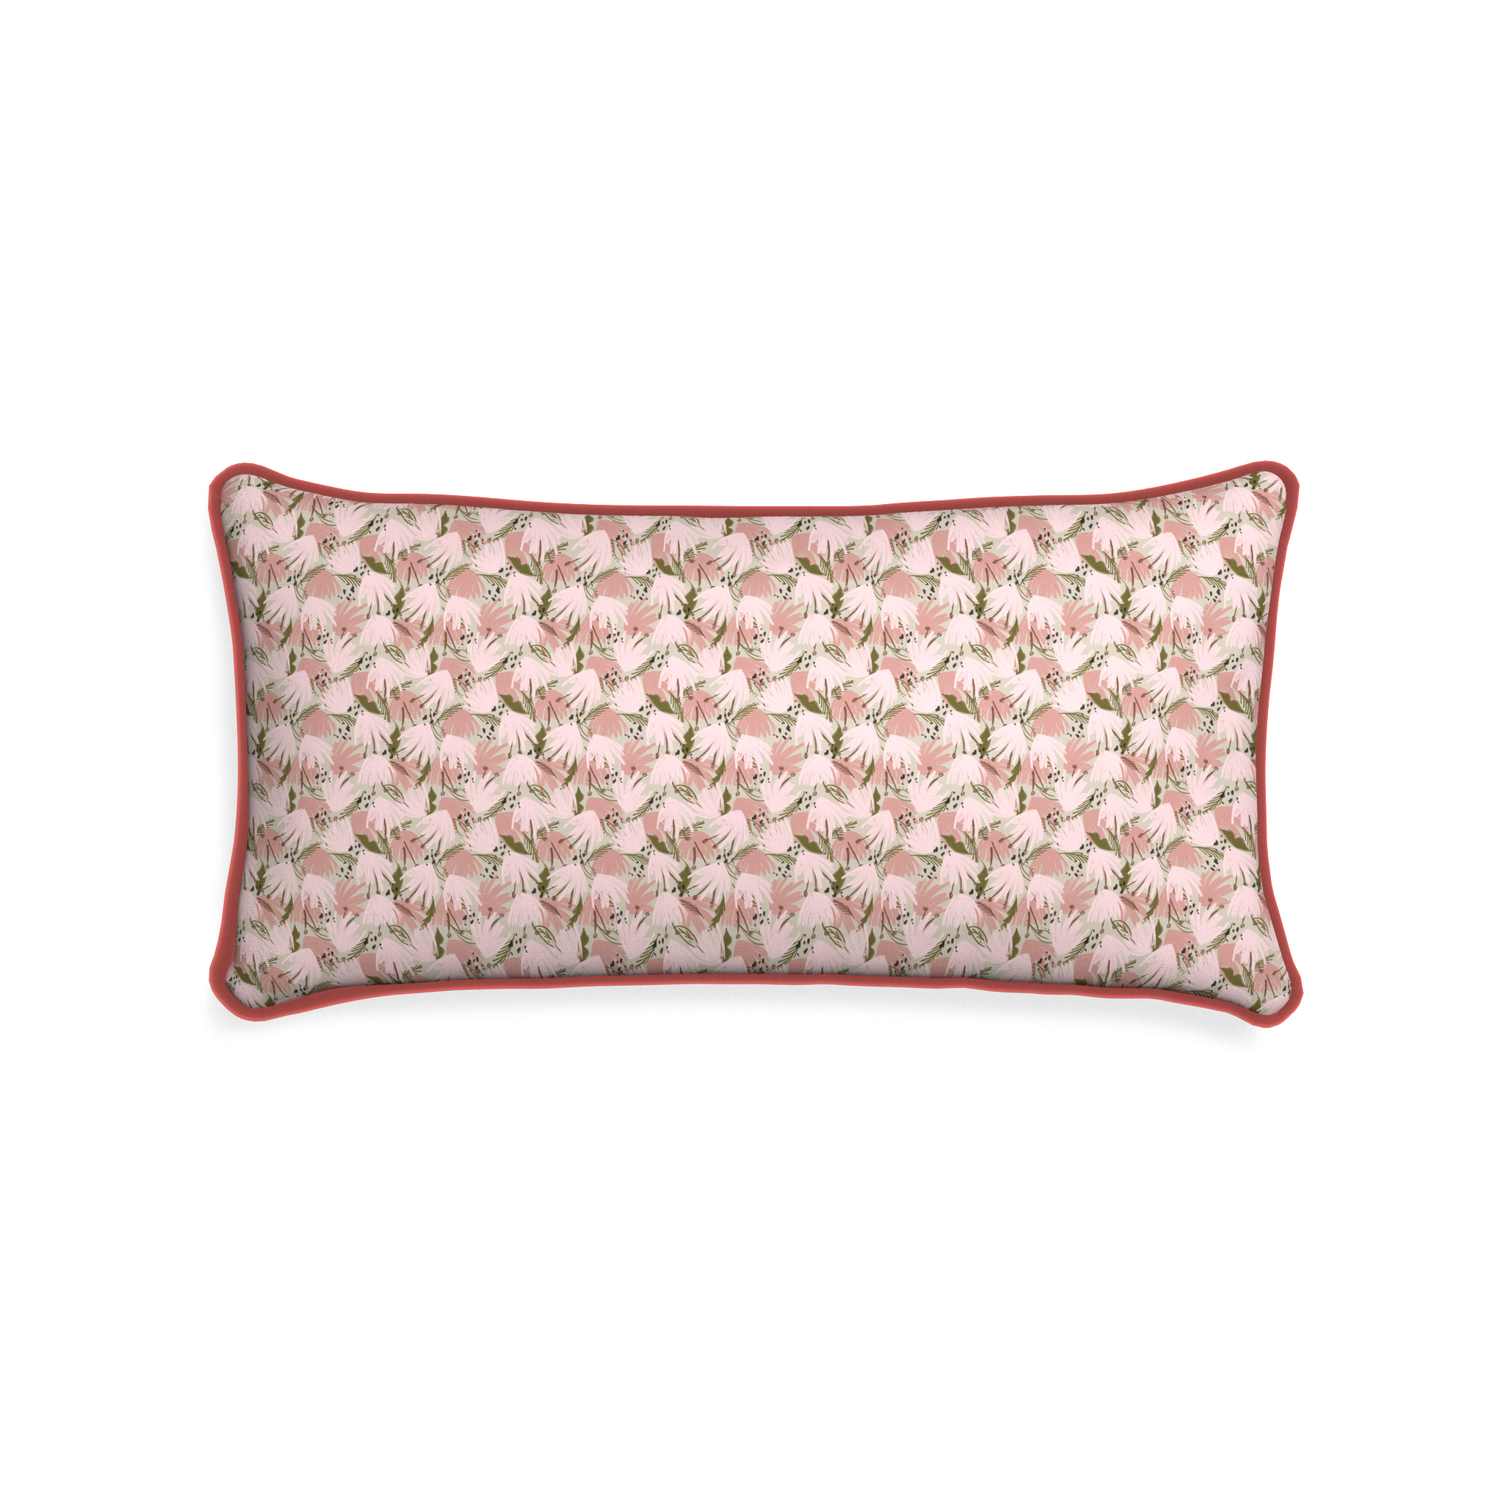 Midi-lumbar eden pink custom pink floralpillow with c piping on white background